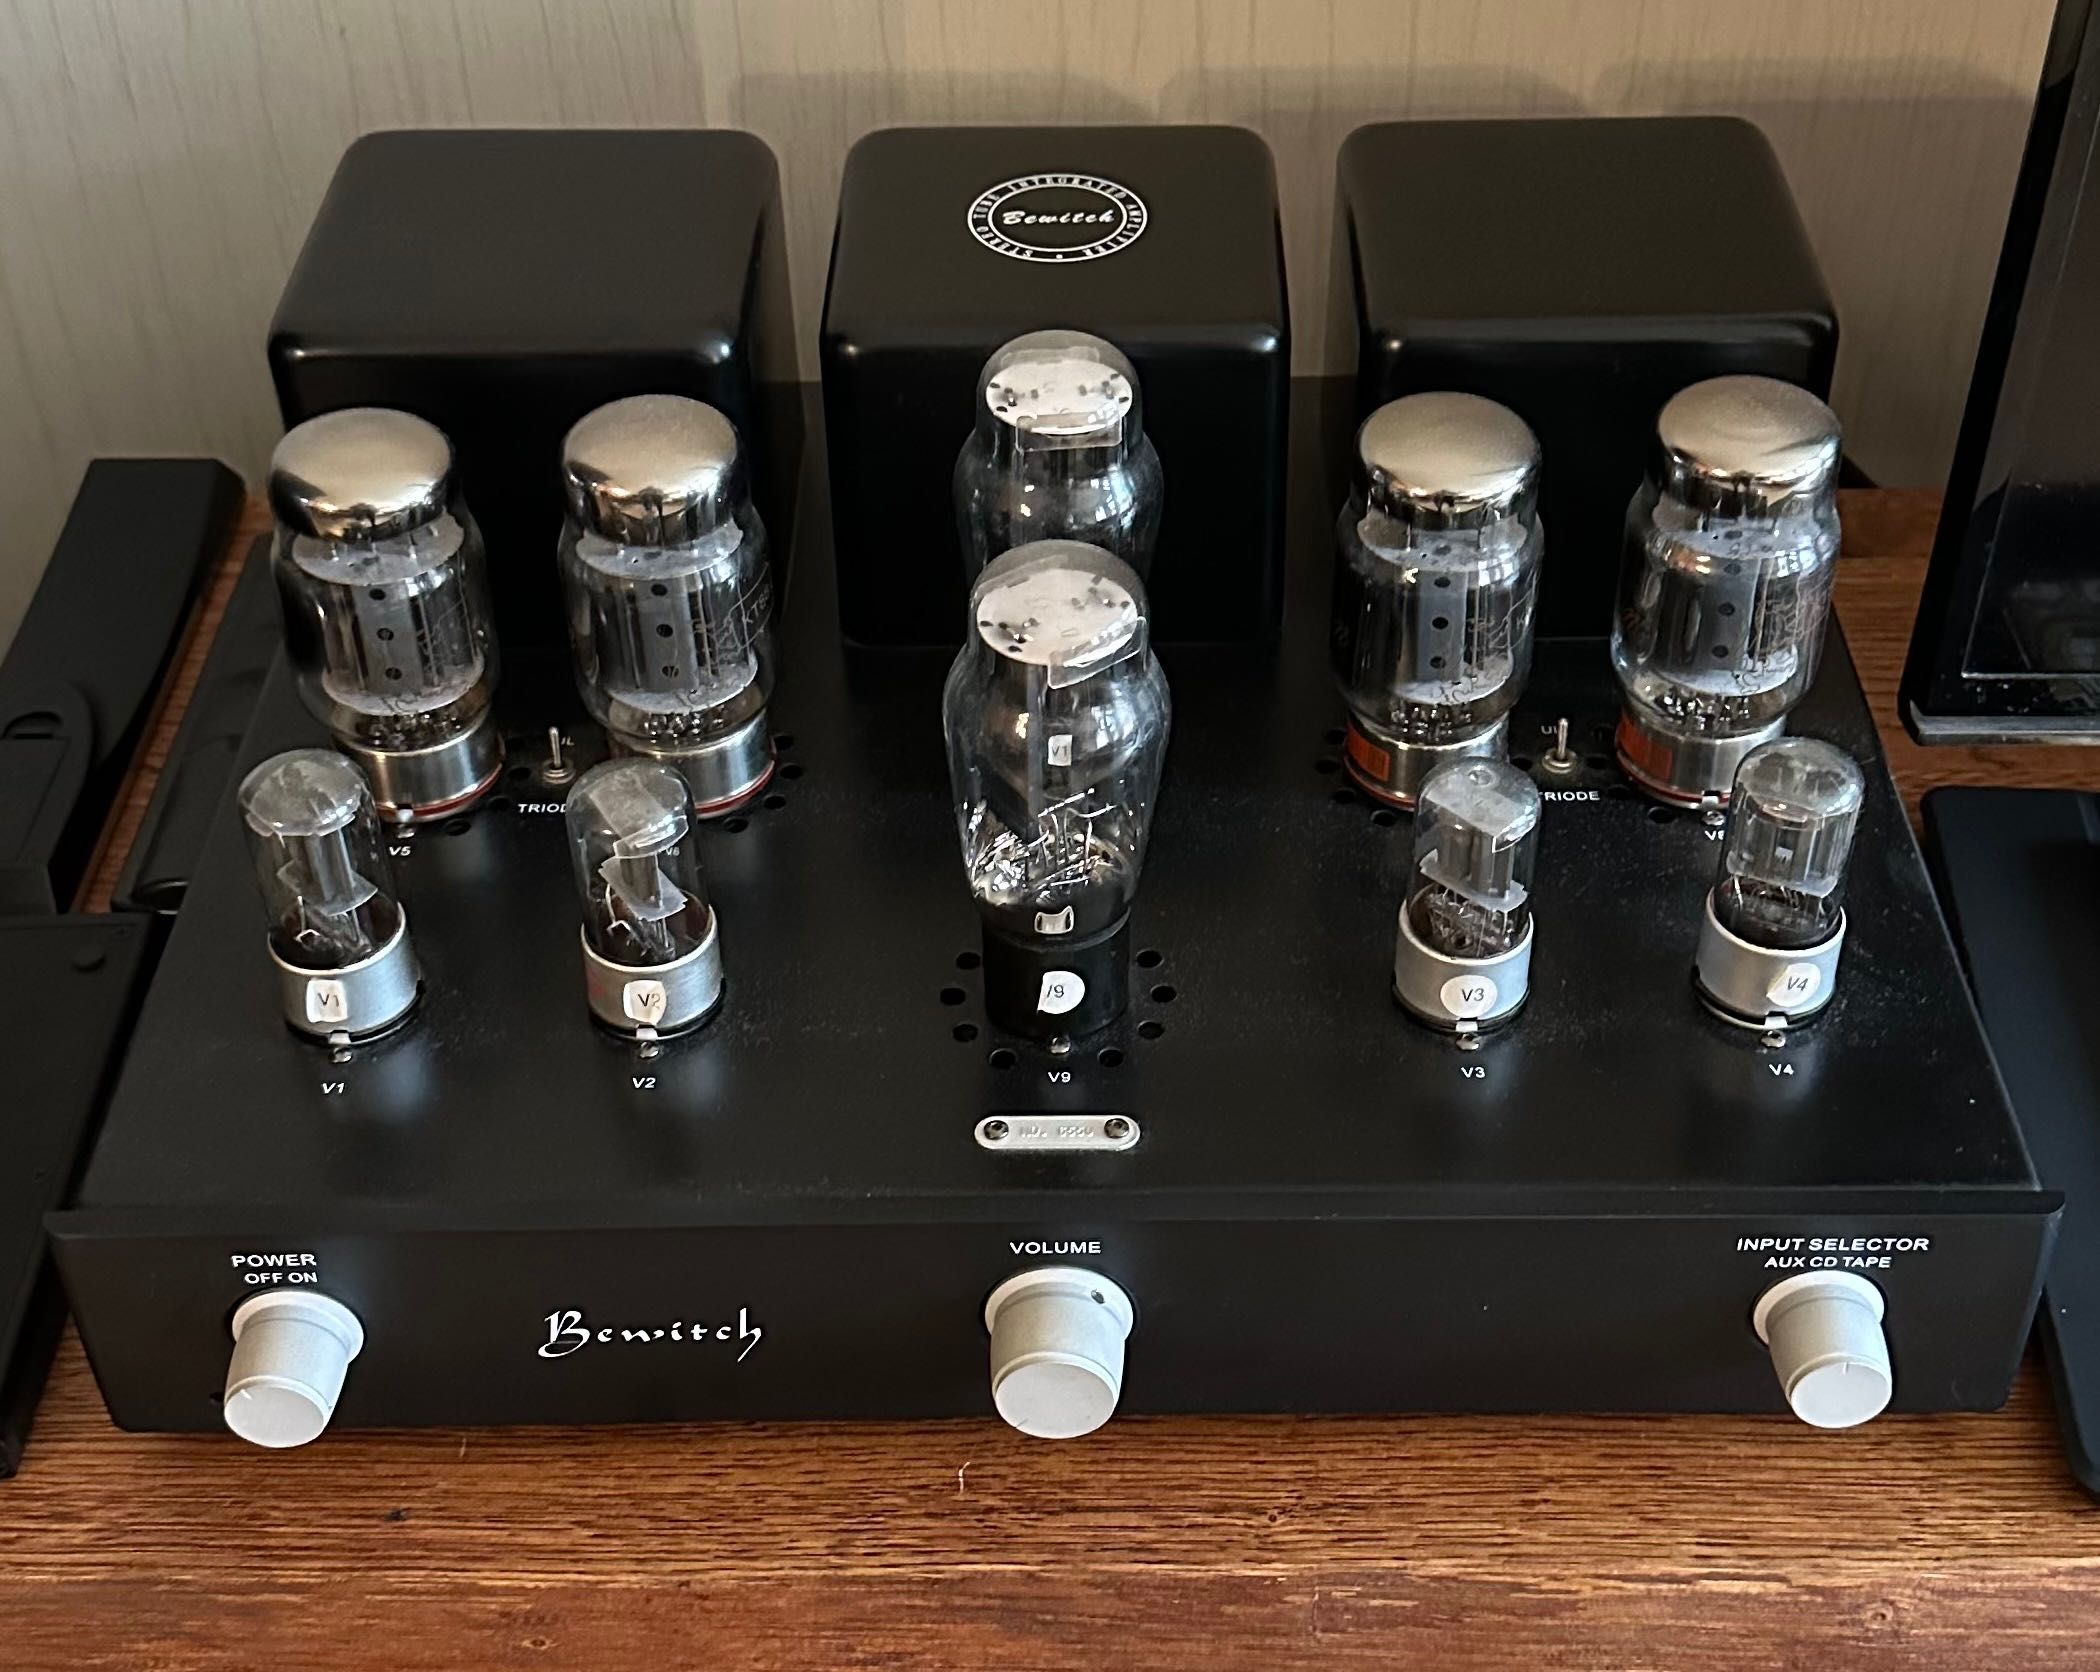 Amplifier Phase Linear 400